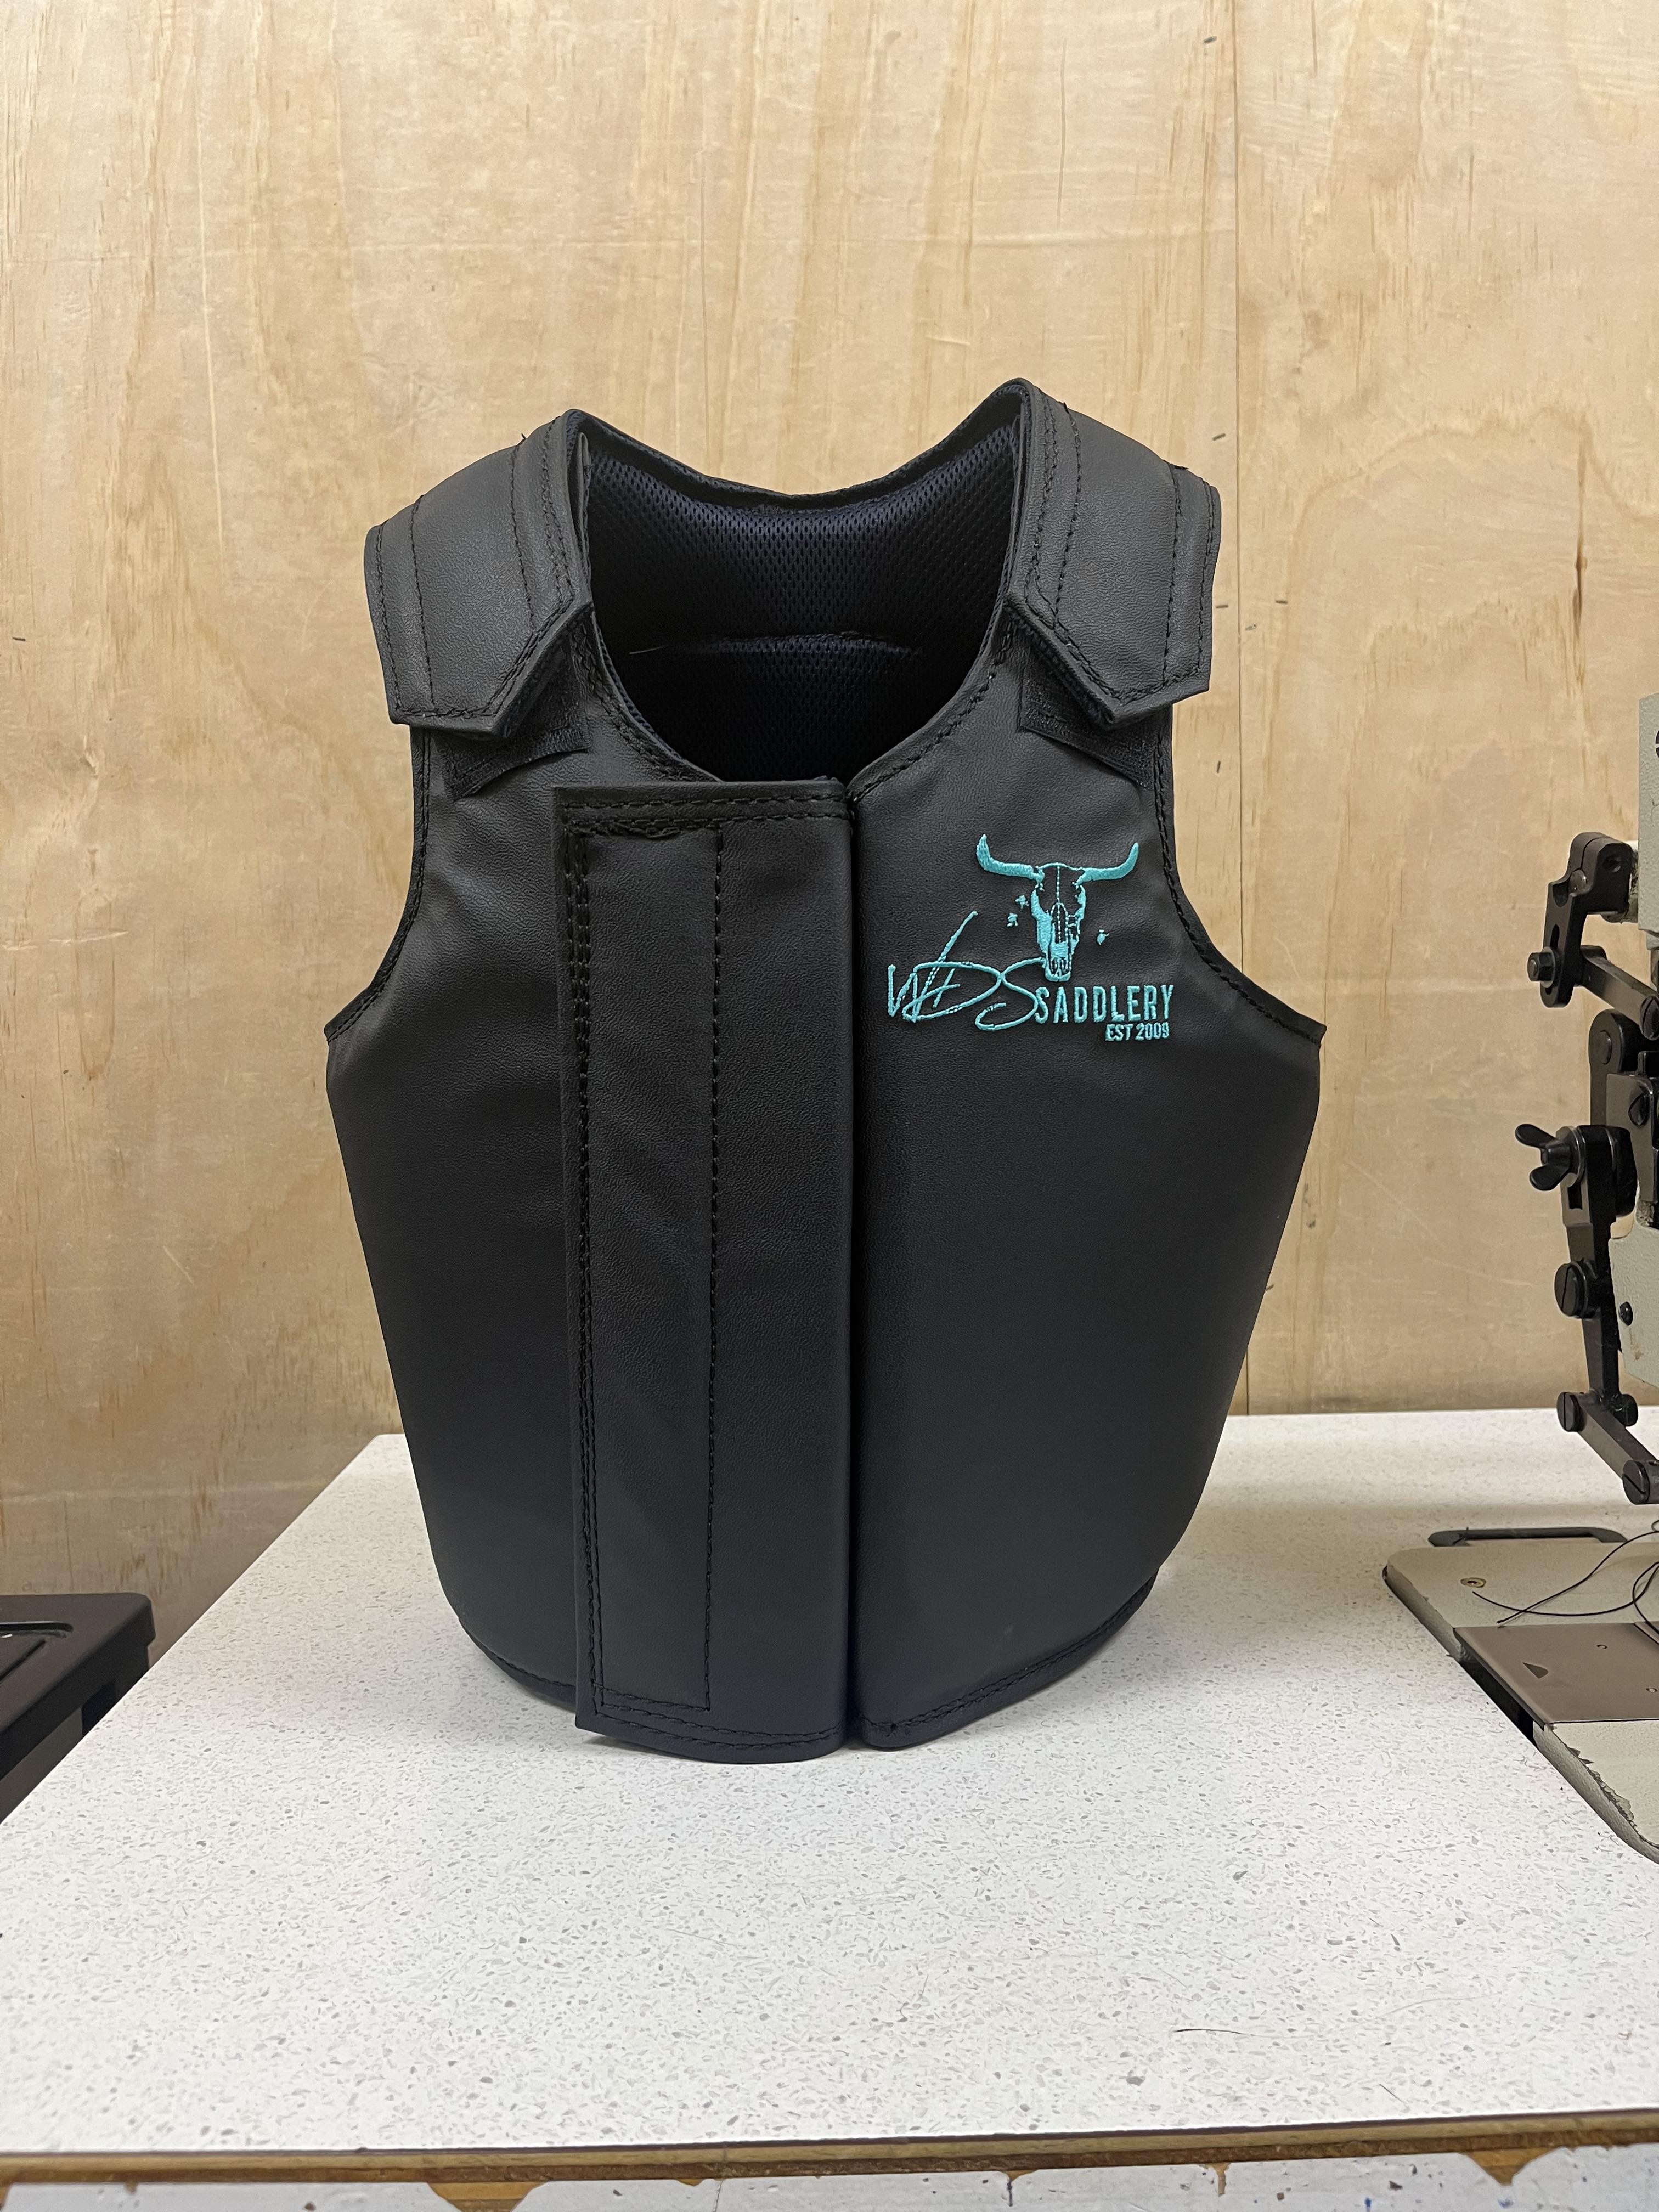 WDS Saddlery Pro Rodeo Vest - Turquoise Youth - Ready made to be shipped